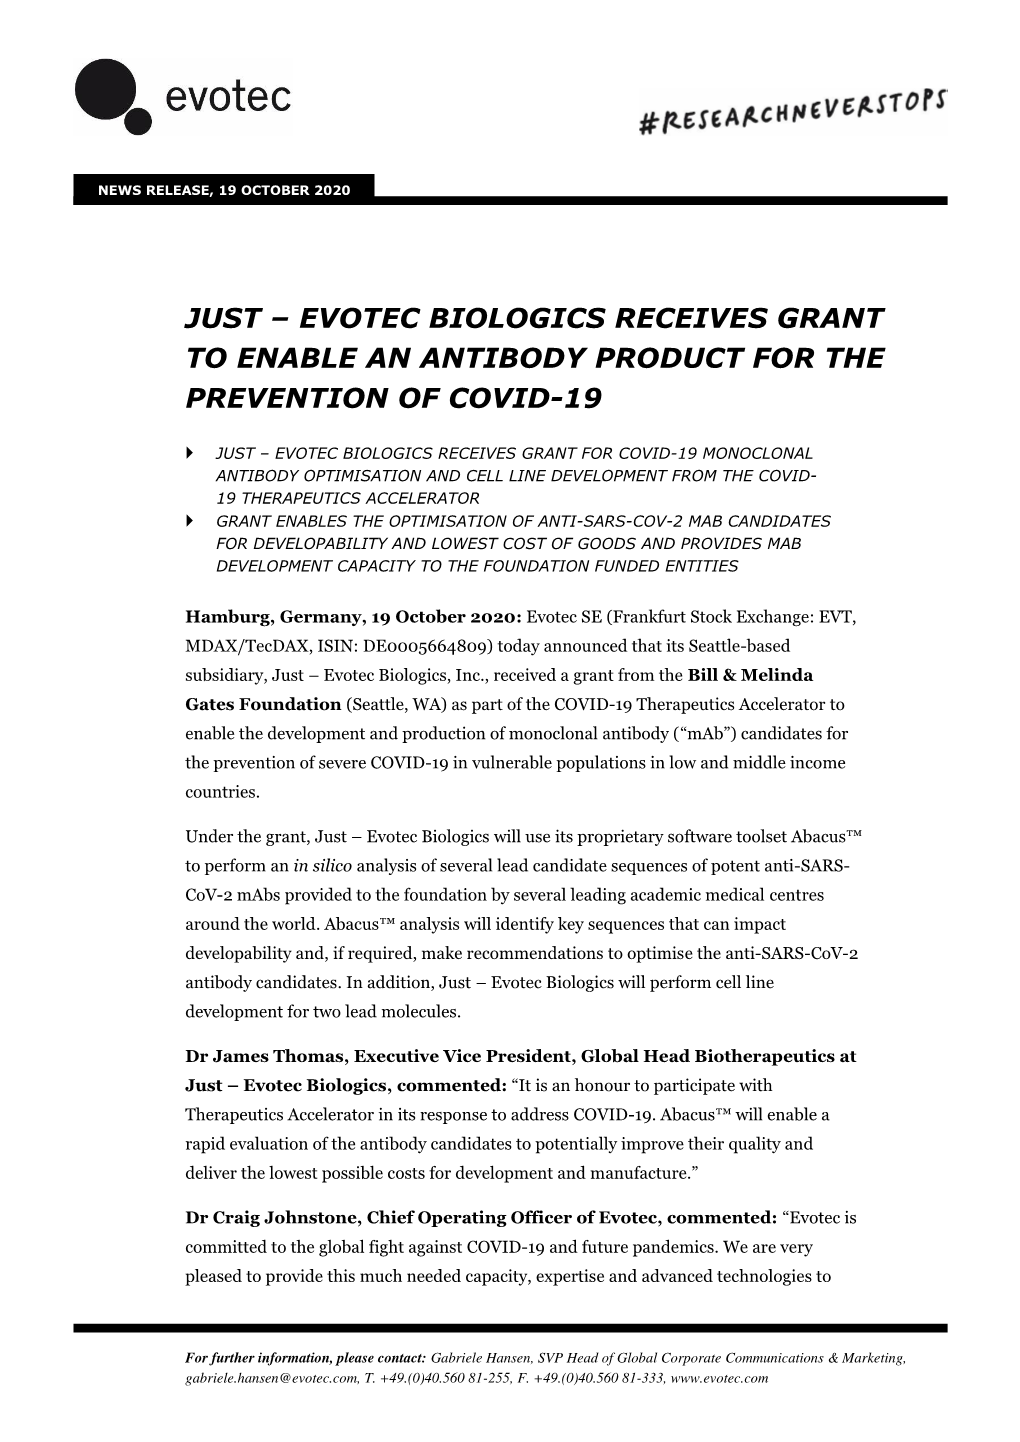 Just – Evotec Biologics Receives Grant to Enable an Antibody Product for the Prevention of Covid-19